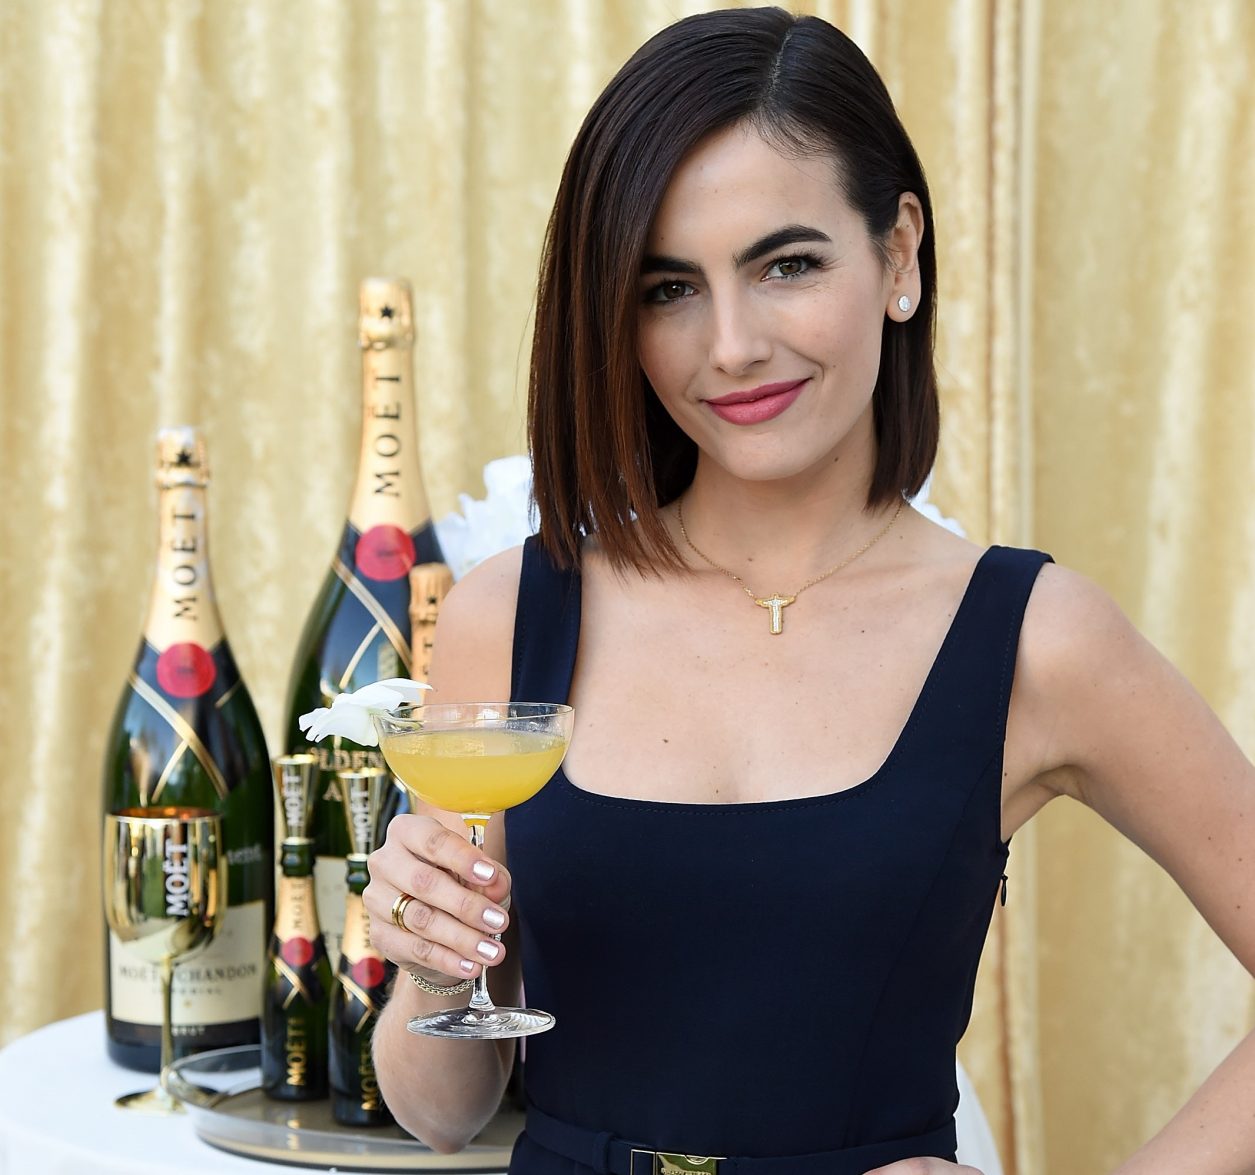 BEVERLY HILLS, CA - DECEMBER 13:  Camilla Belle poses with the signature cocktail for the 2019 Golden Globes, The Moet Belle, on display at the 76th Golden Globe Awards Show Menu Unveiling at The Beverly Hilton Hotel on December 13, 2018 in Los Angeles, California.  (Photo by Michael Kovac/Getty Images for Moet & Chandon)